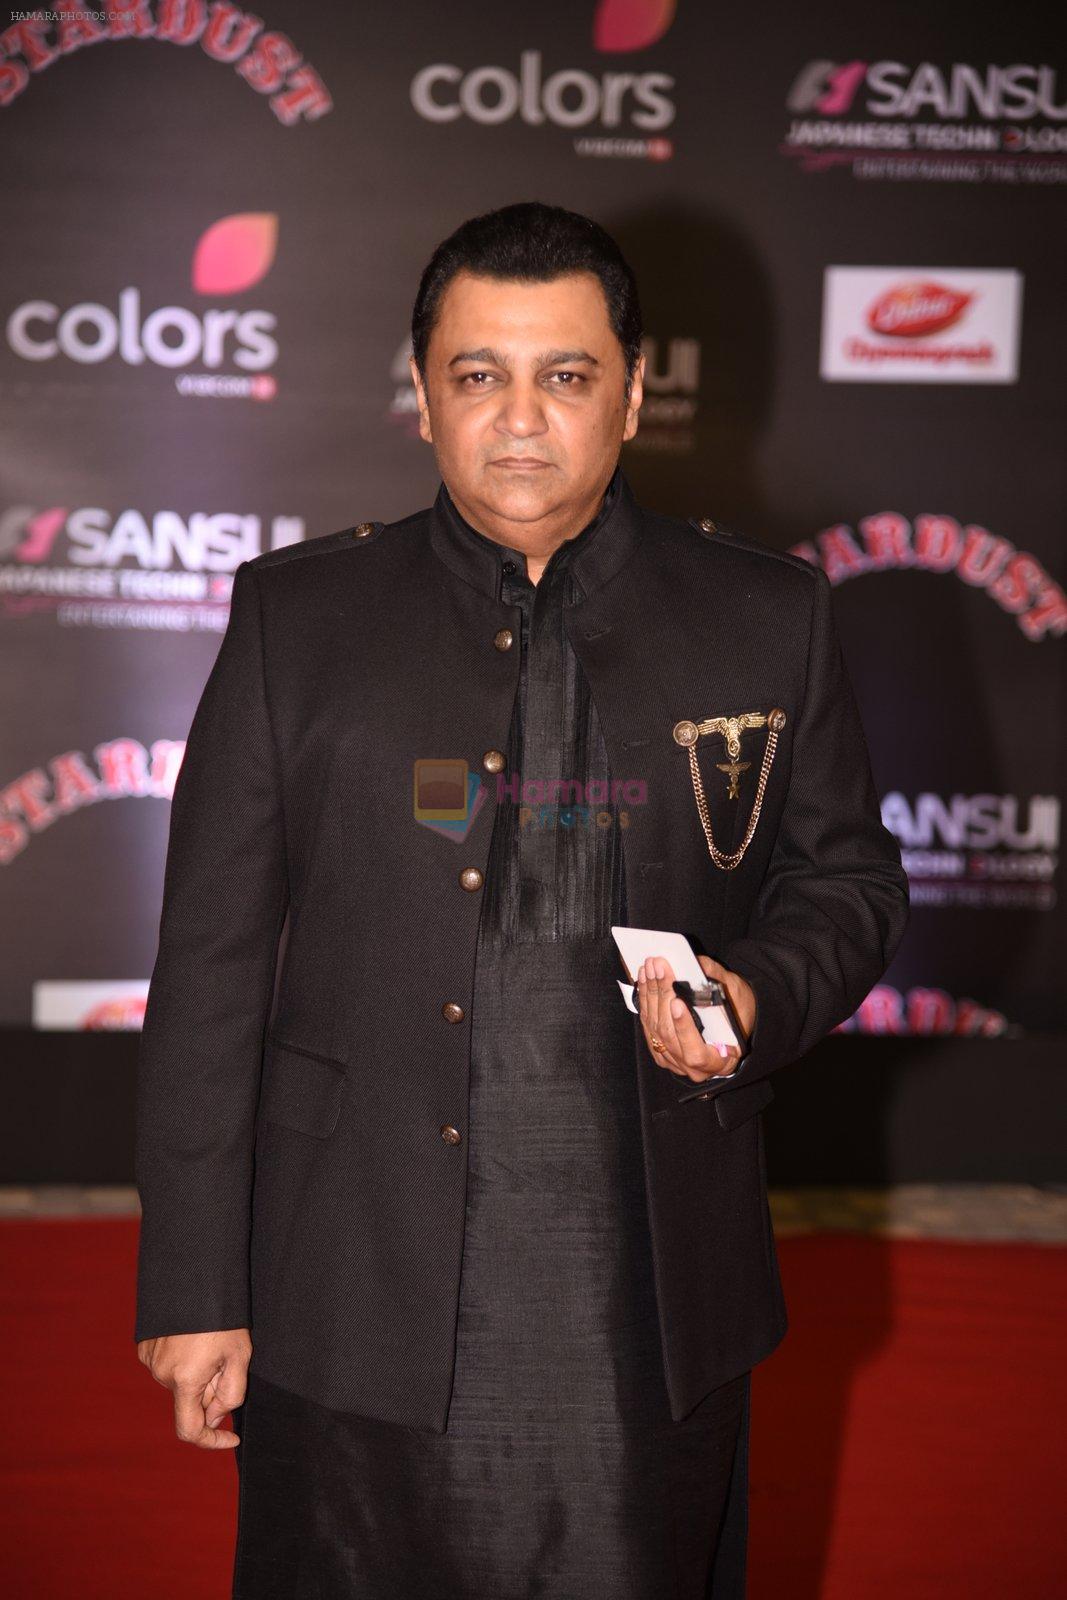 at 14th Sansui COLORS Stardust Awards on 19th Dec 2016